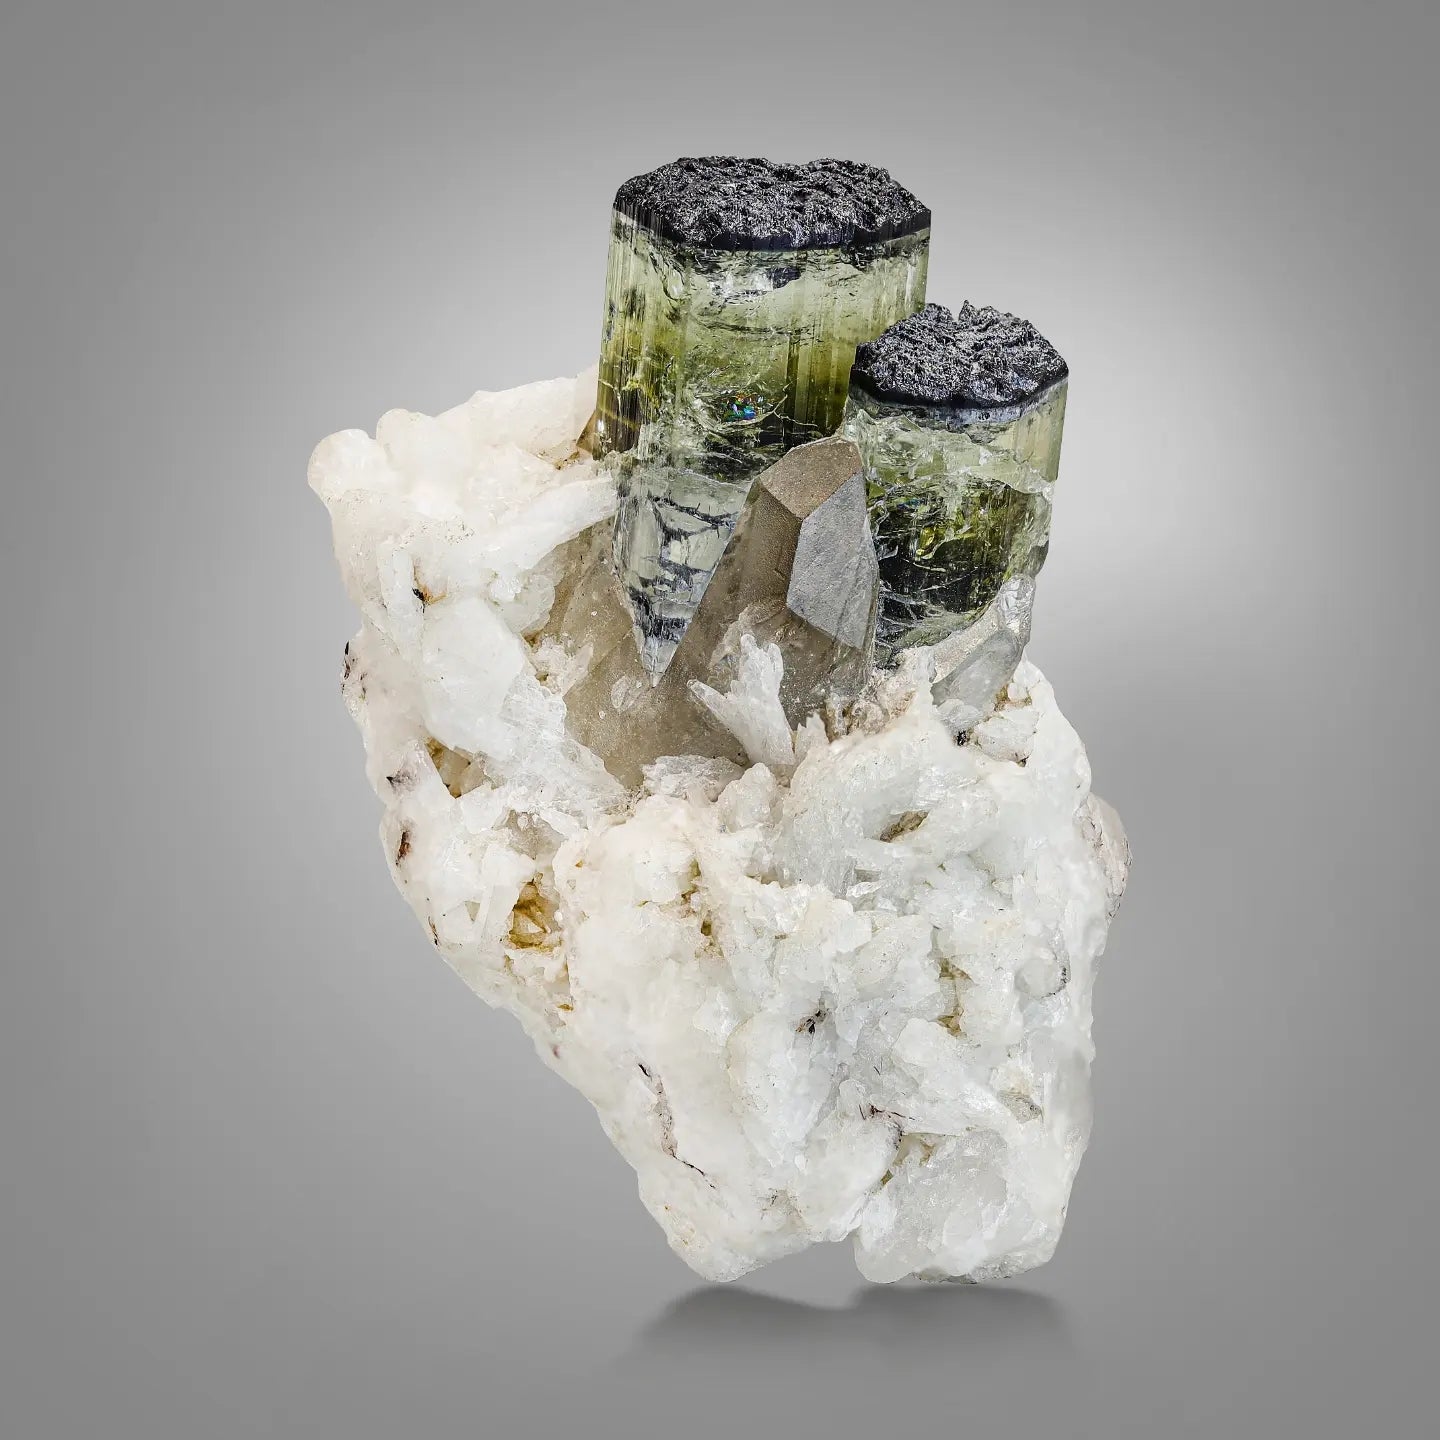 New Find of Blue Cap Tourmaline on Cleavelandite with Smoky Quartz from Badakhshan Province, Afghanistan